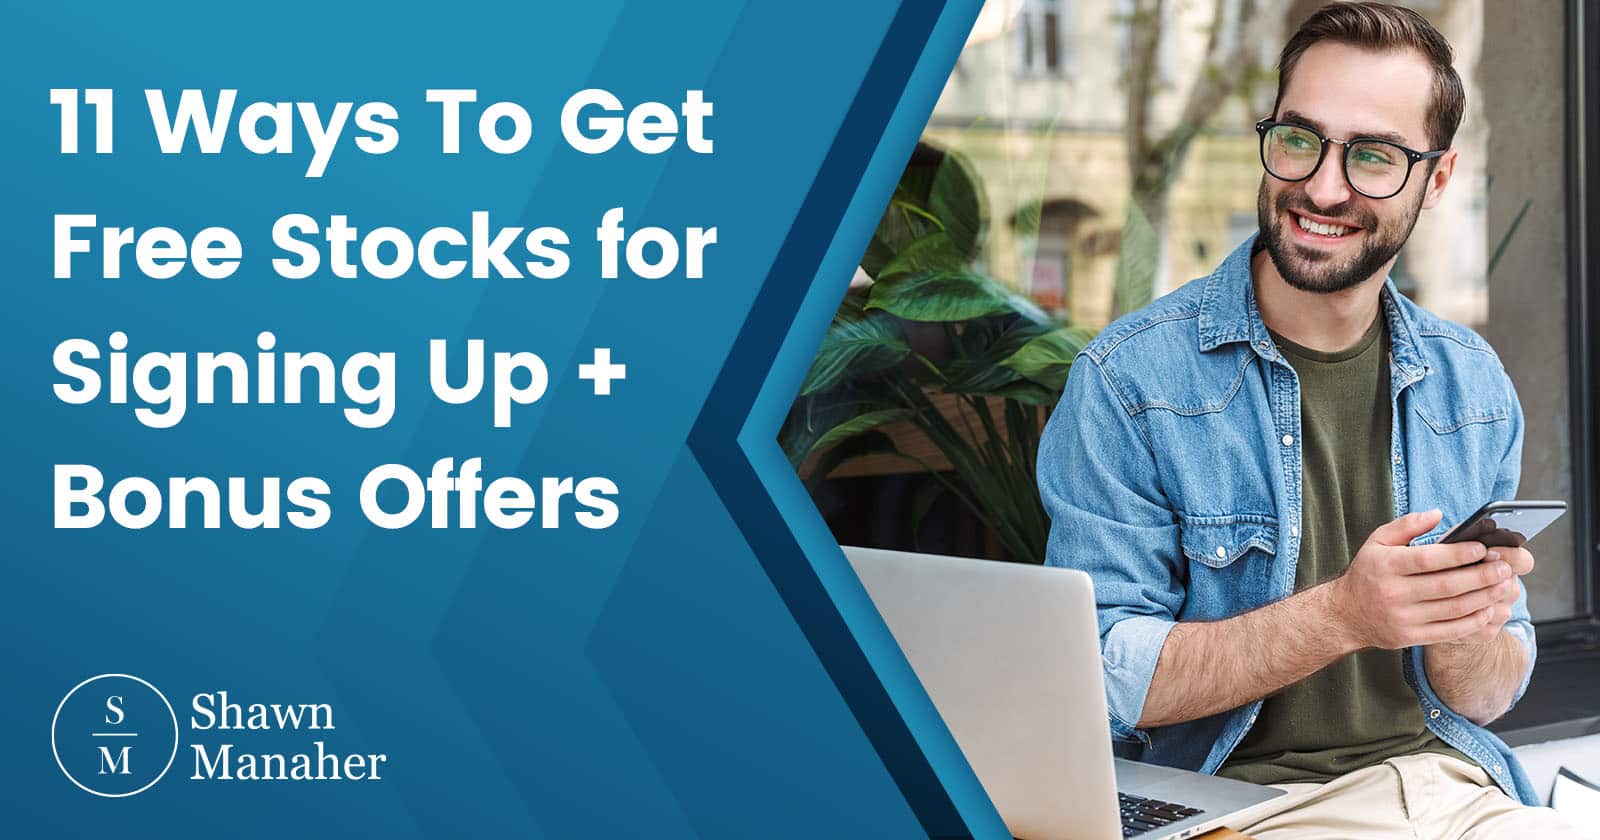 11 Ways To Get Free Stocks for Signing Up + Bonus Offers